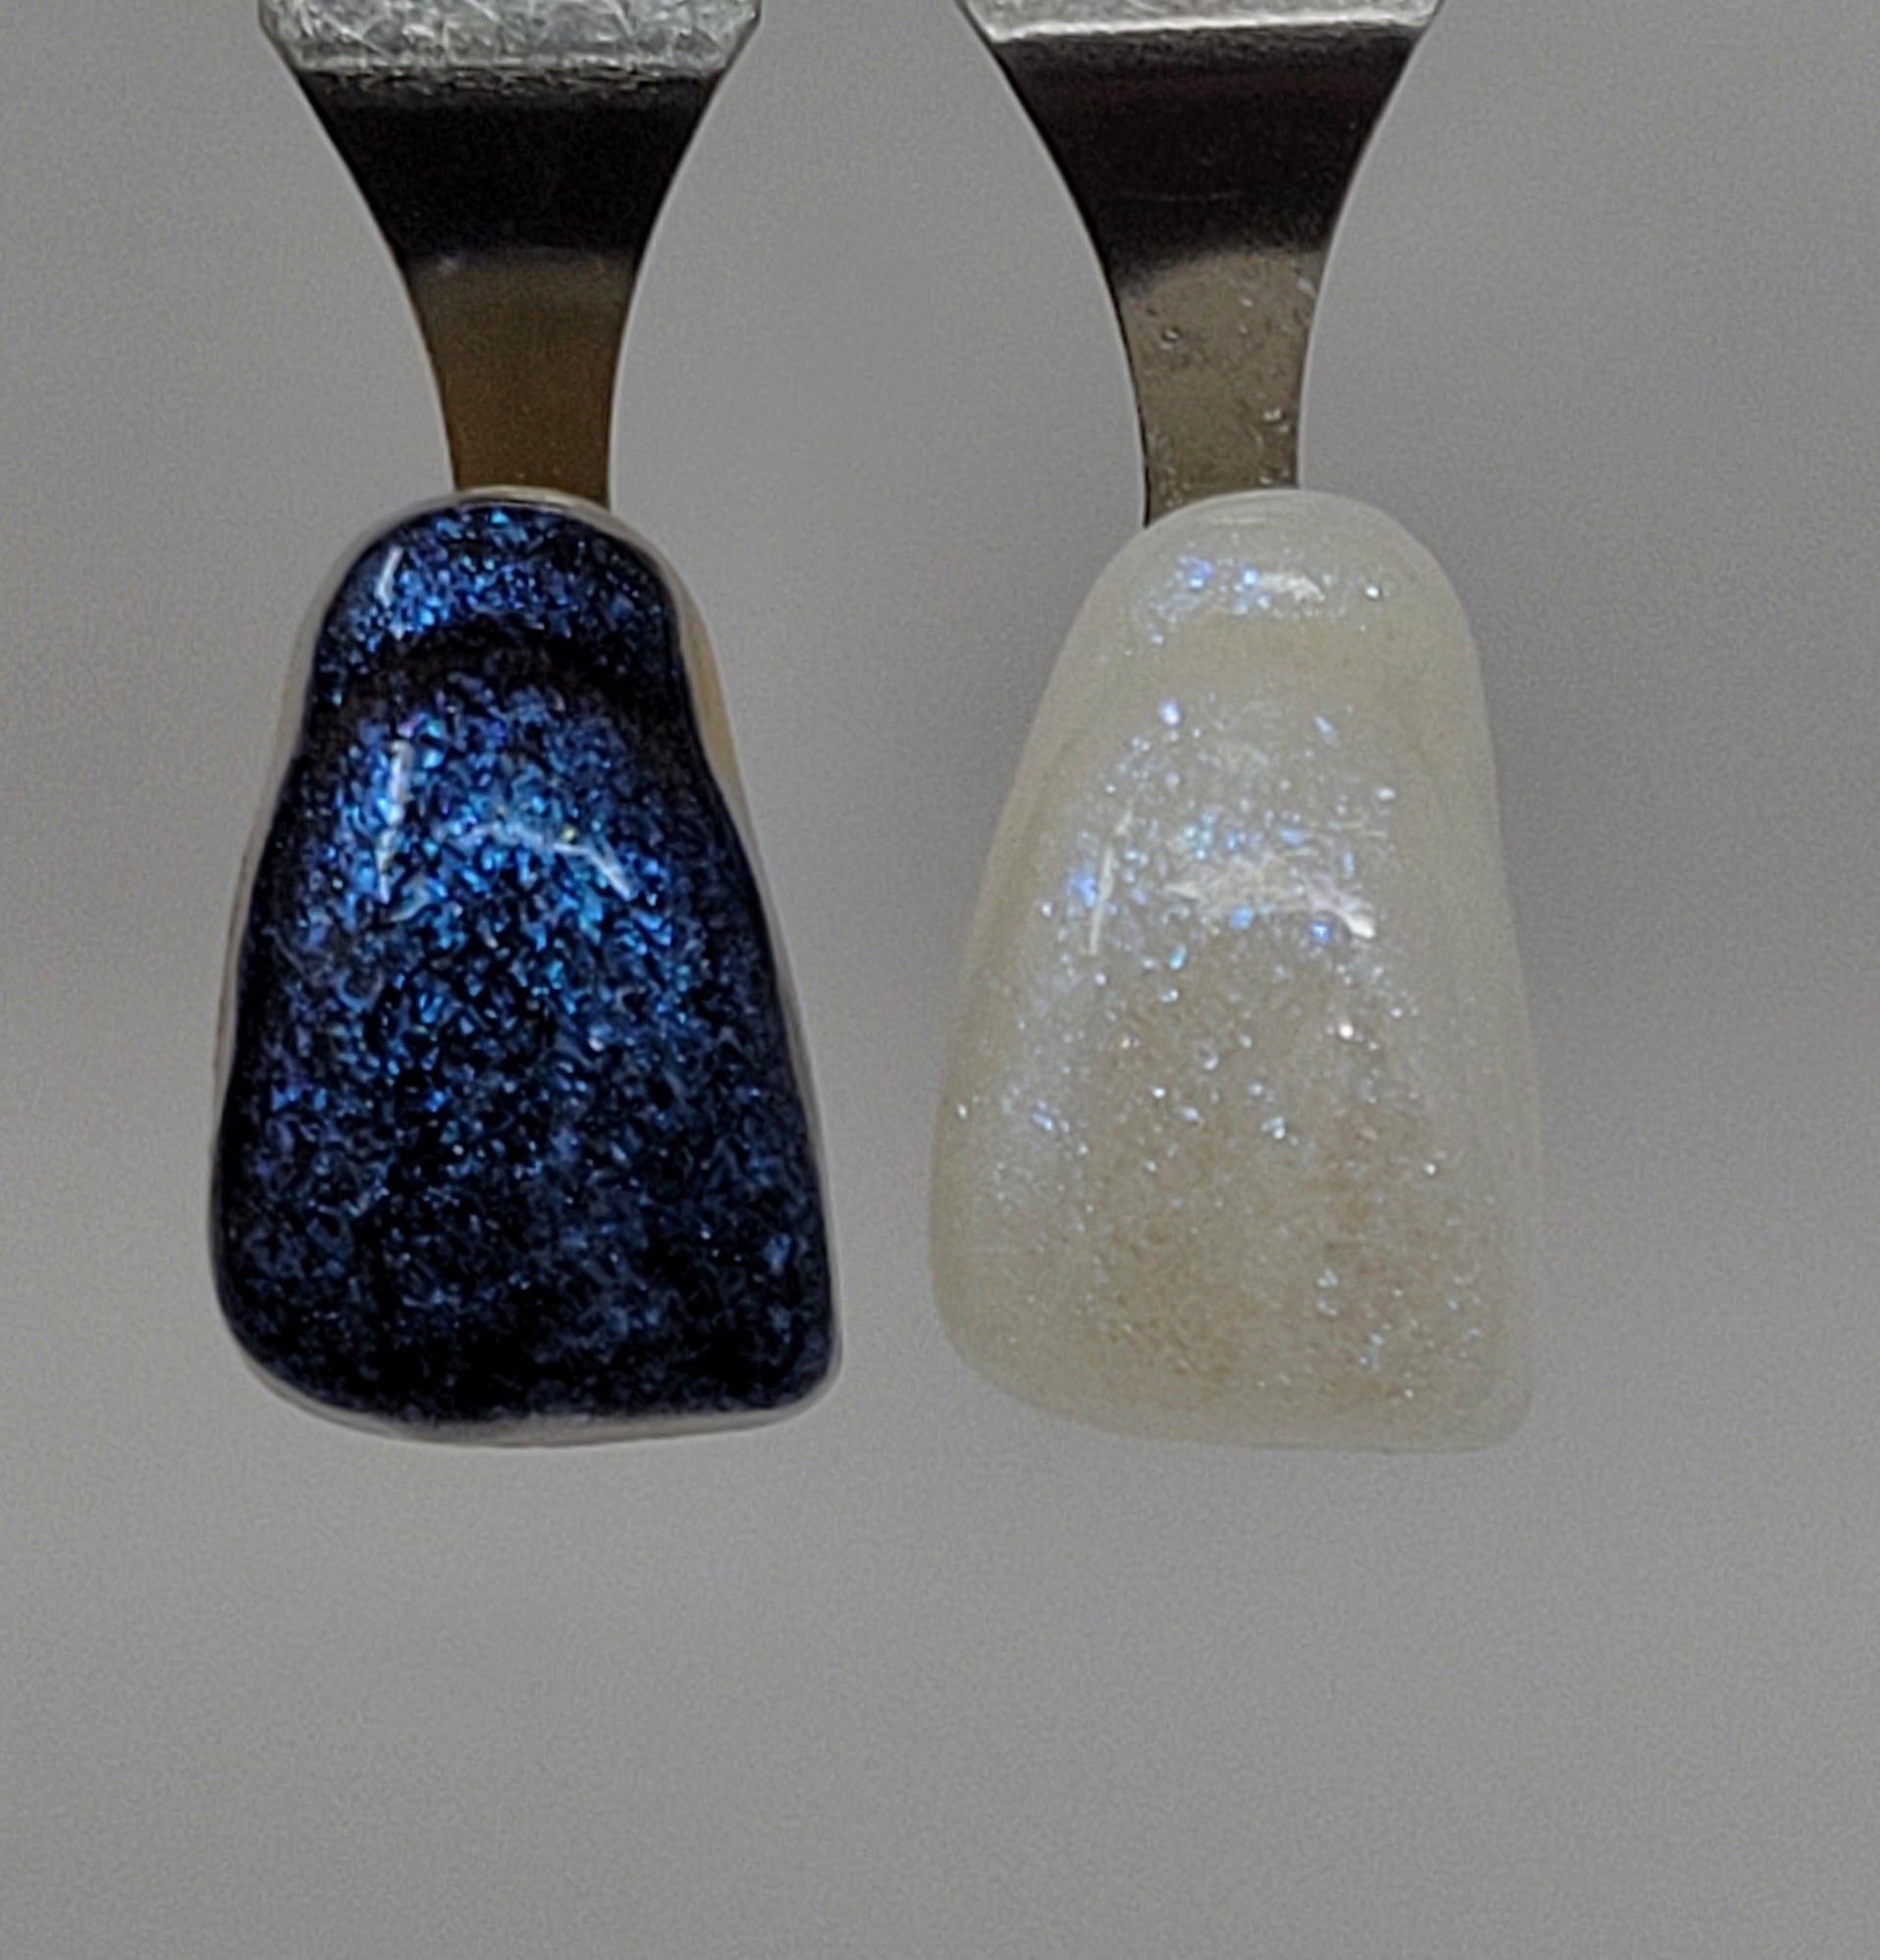 Blue Opal Temporary Tattooth Colorant on a demo tooth.  These colorants can be applied to teeth to temporarily alter their color or iridescence.